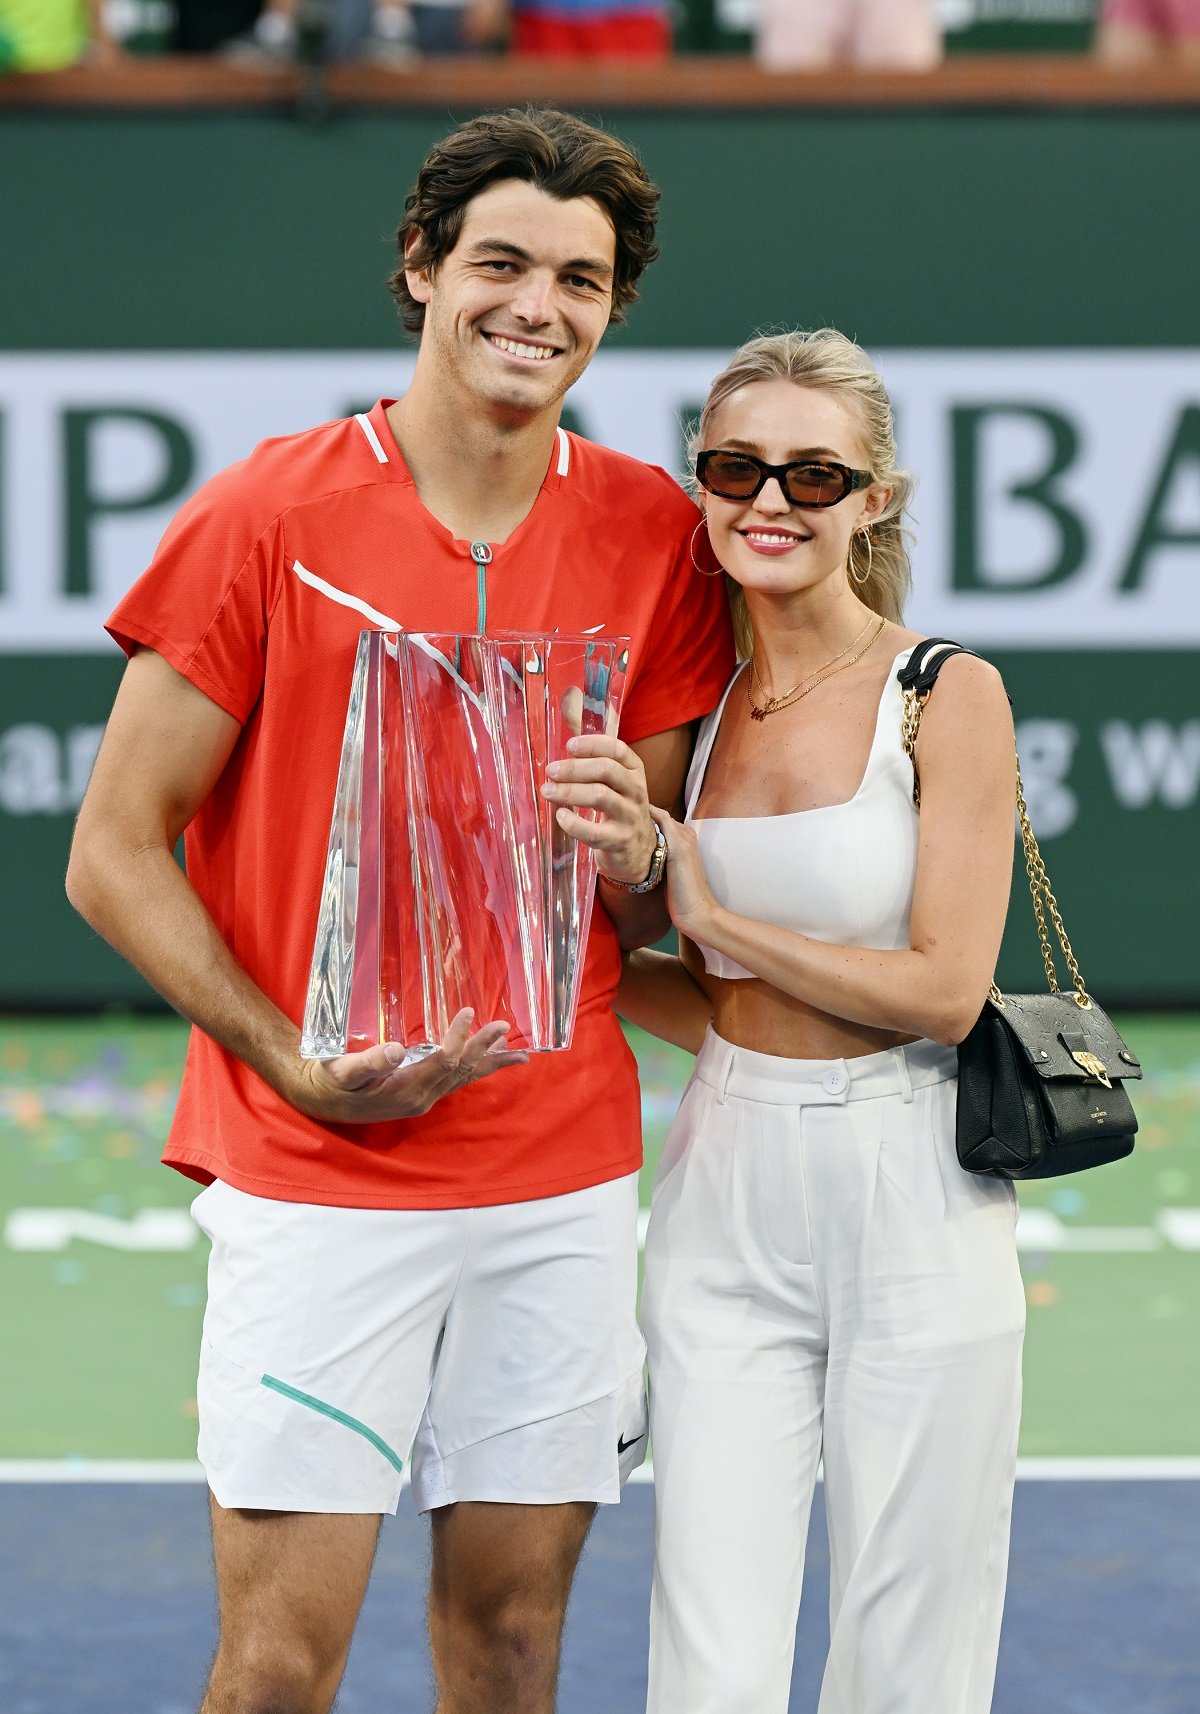 Taylor Fritz posing on the court with girlfriend Morgan Riddle after winning a finals tennis match at the BNP Paribas Open